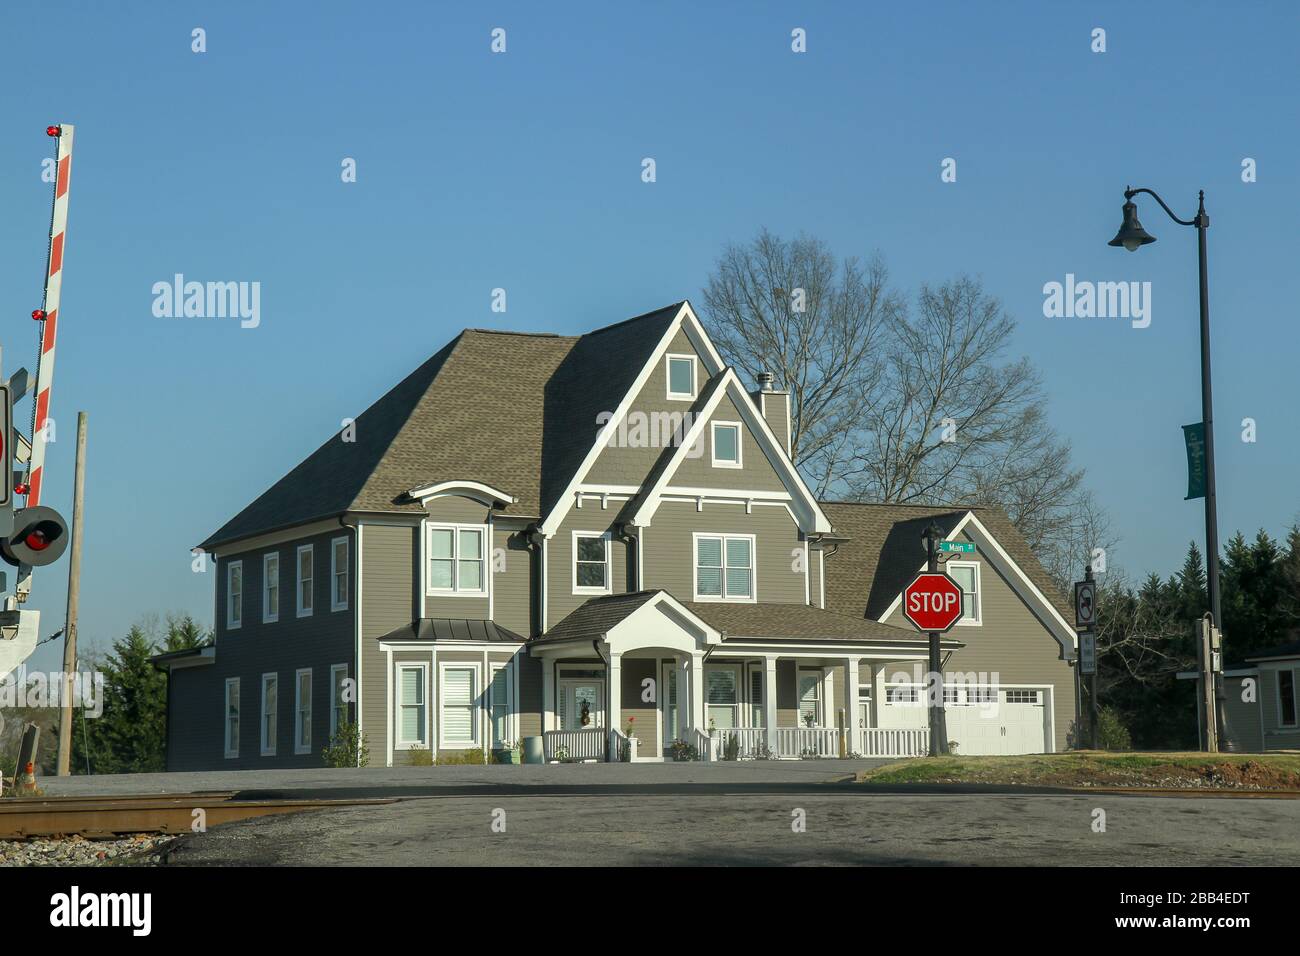 A home in Buford, Georgia, United States Stock Photo